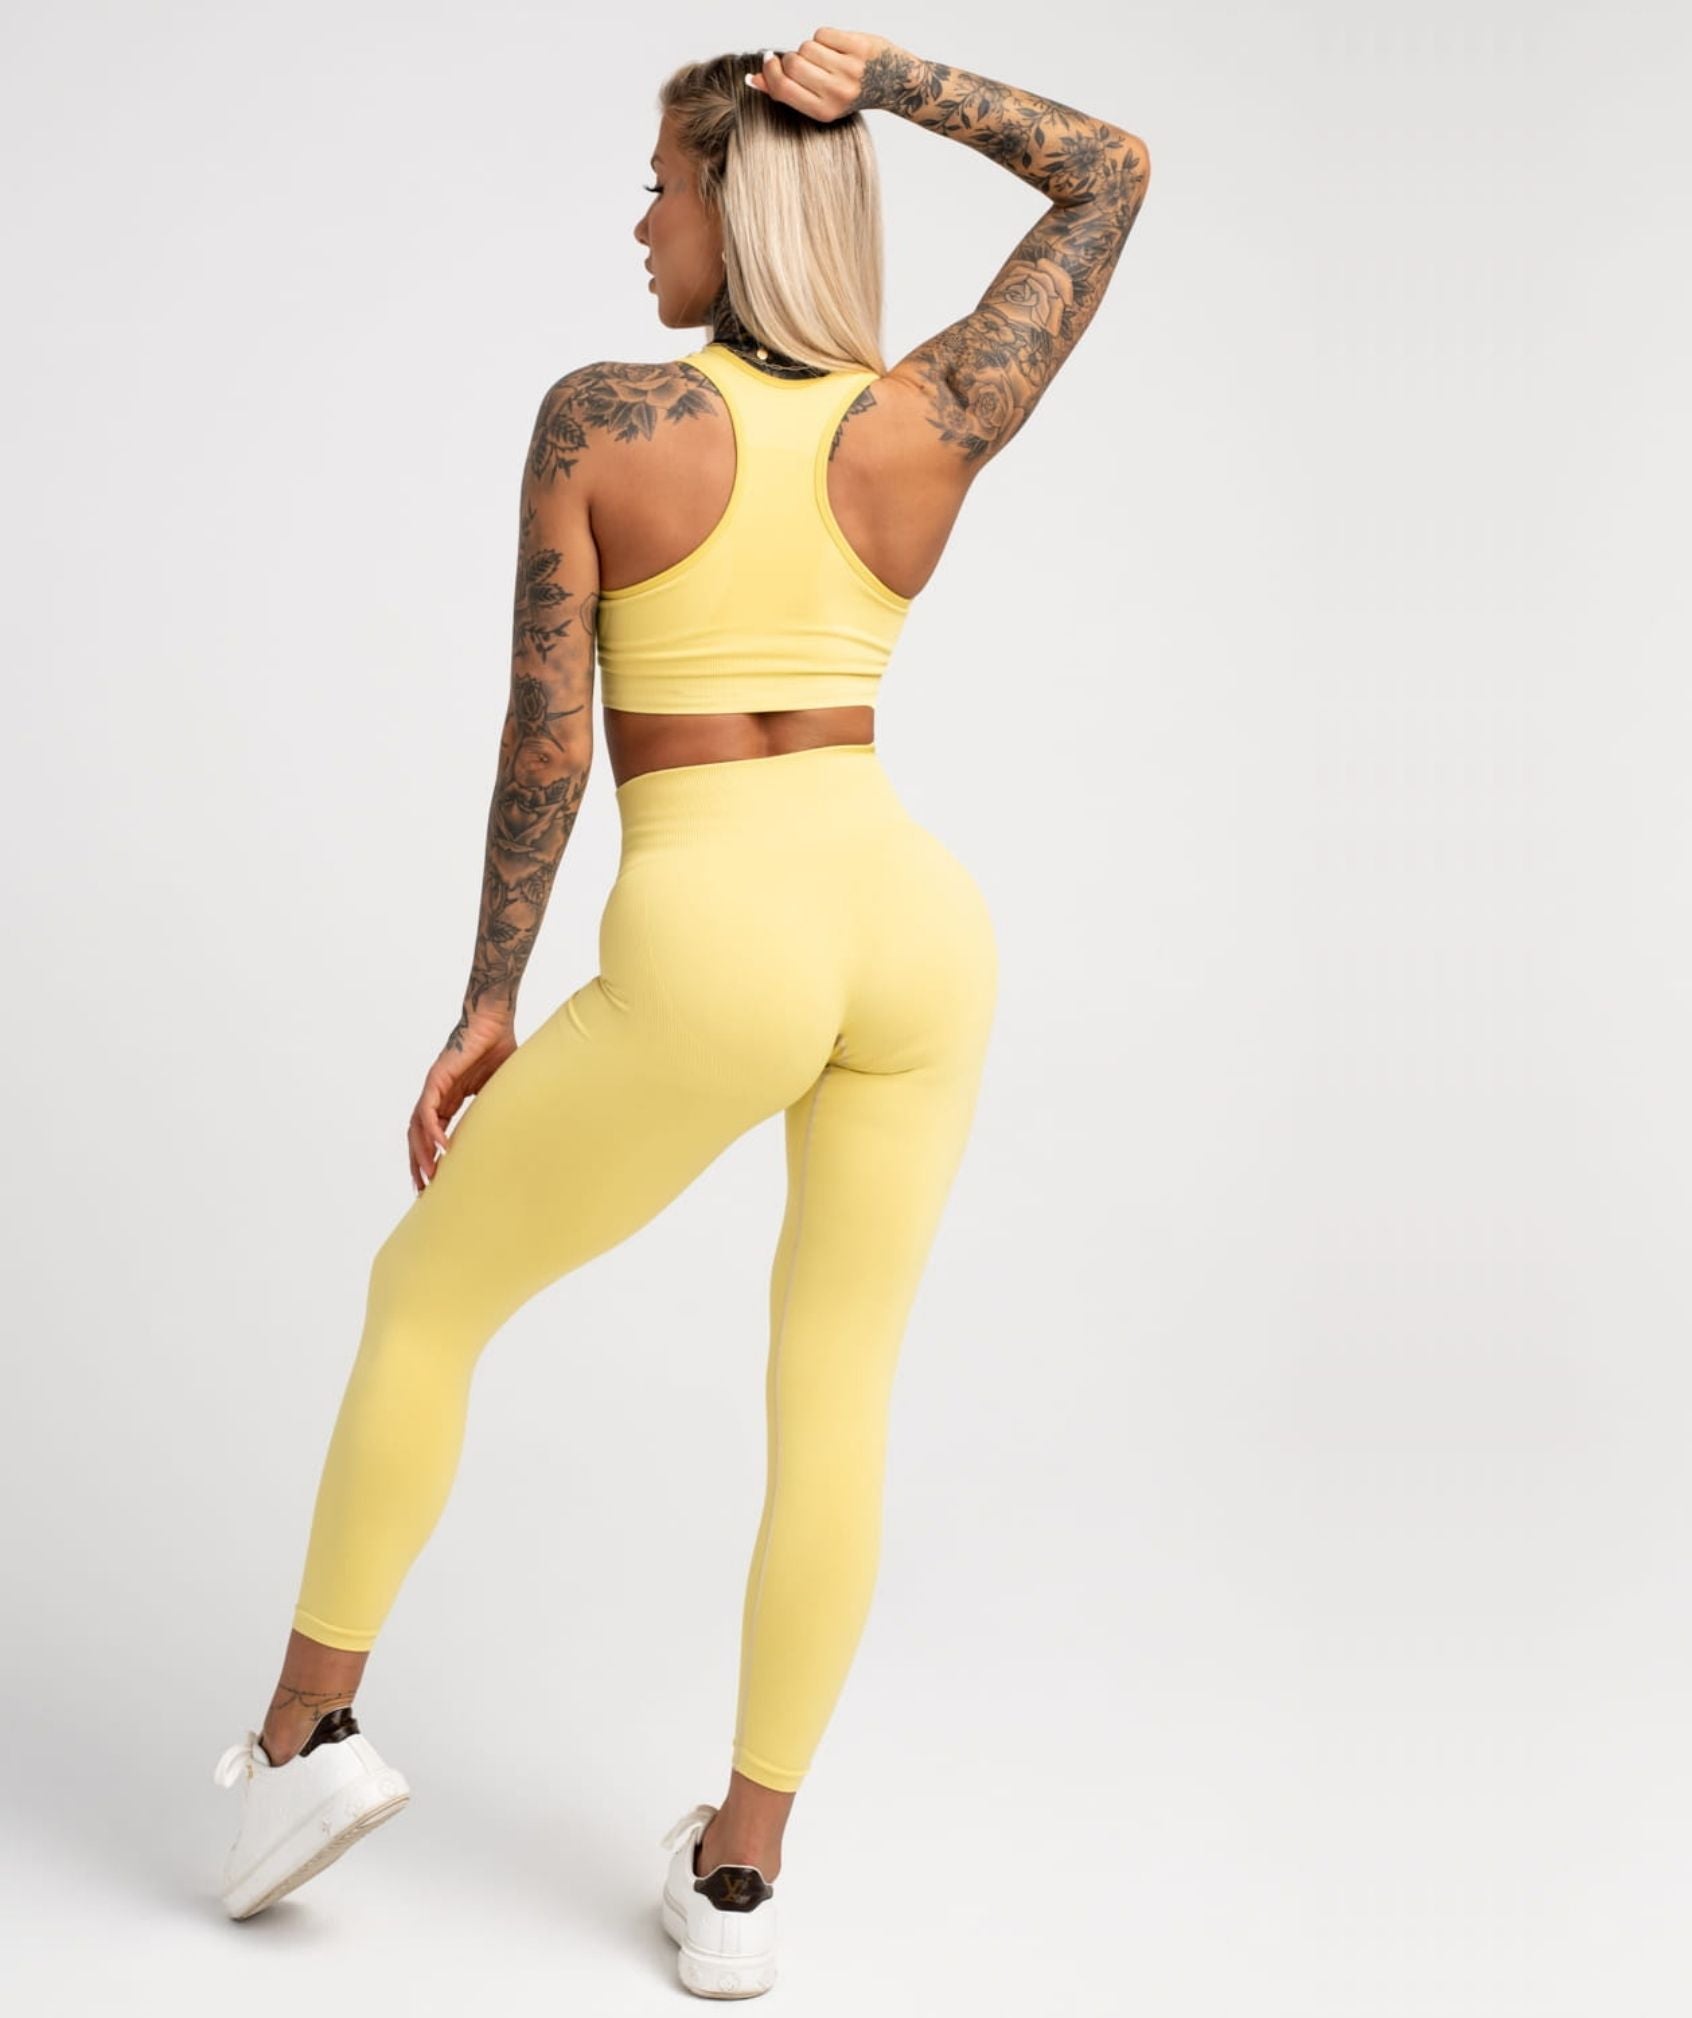 Gym Glamour - May Compress Leggings (Golden Hour)